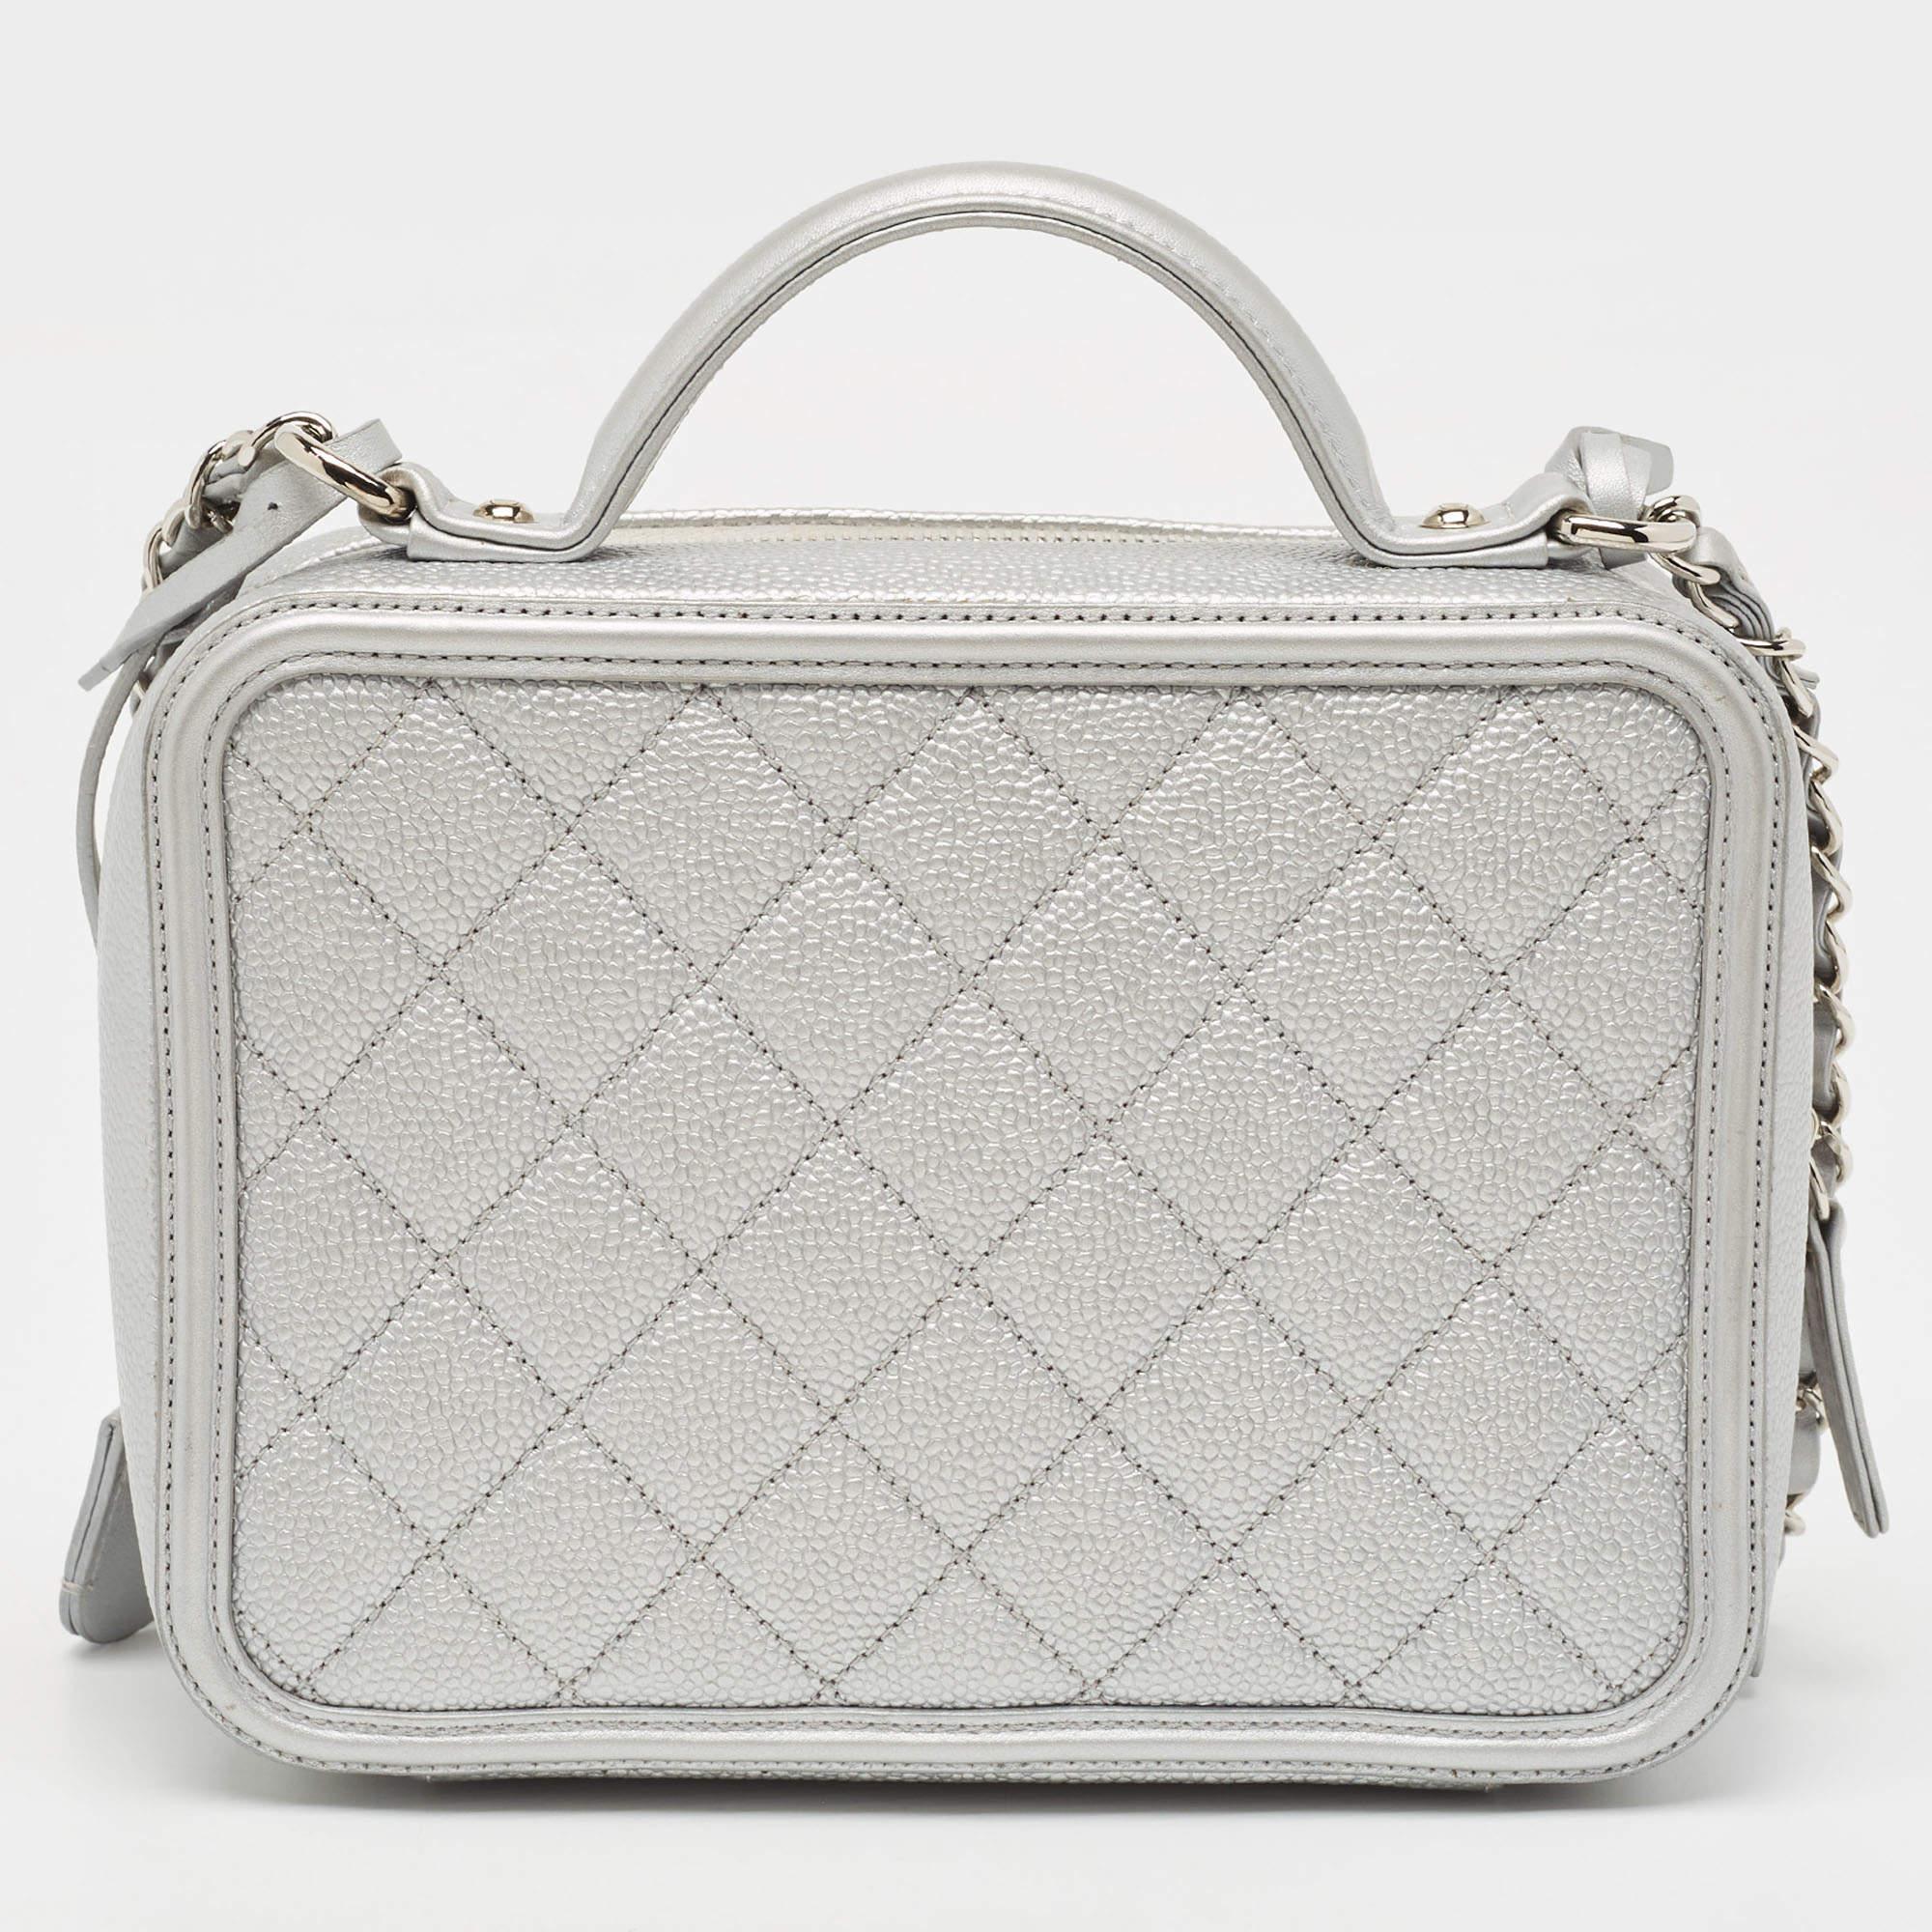 With flawless craftsmanship, immense style quotient, and an air of elegance, this vanity case Chanel bag has it all! Stitched to perfection, the handbag is made using only prime-quality materials so that it lasts you forever. With signature elements